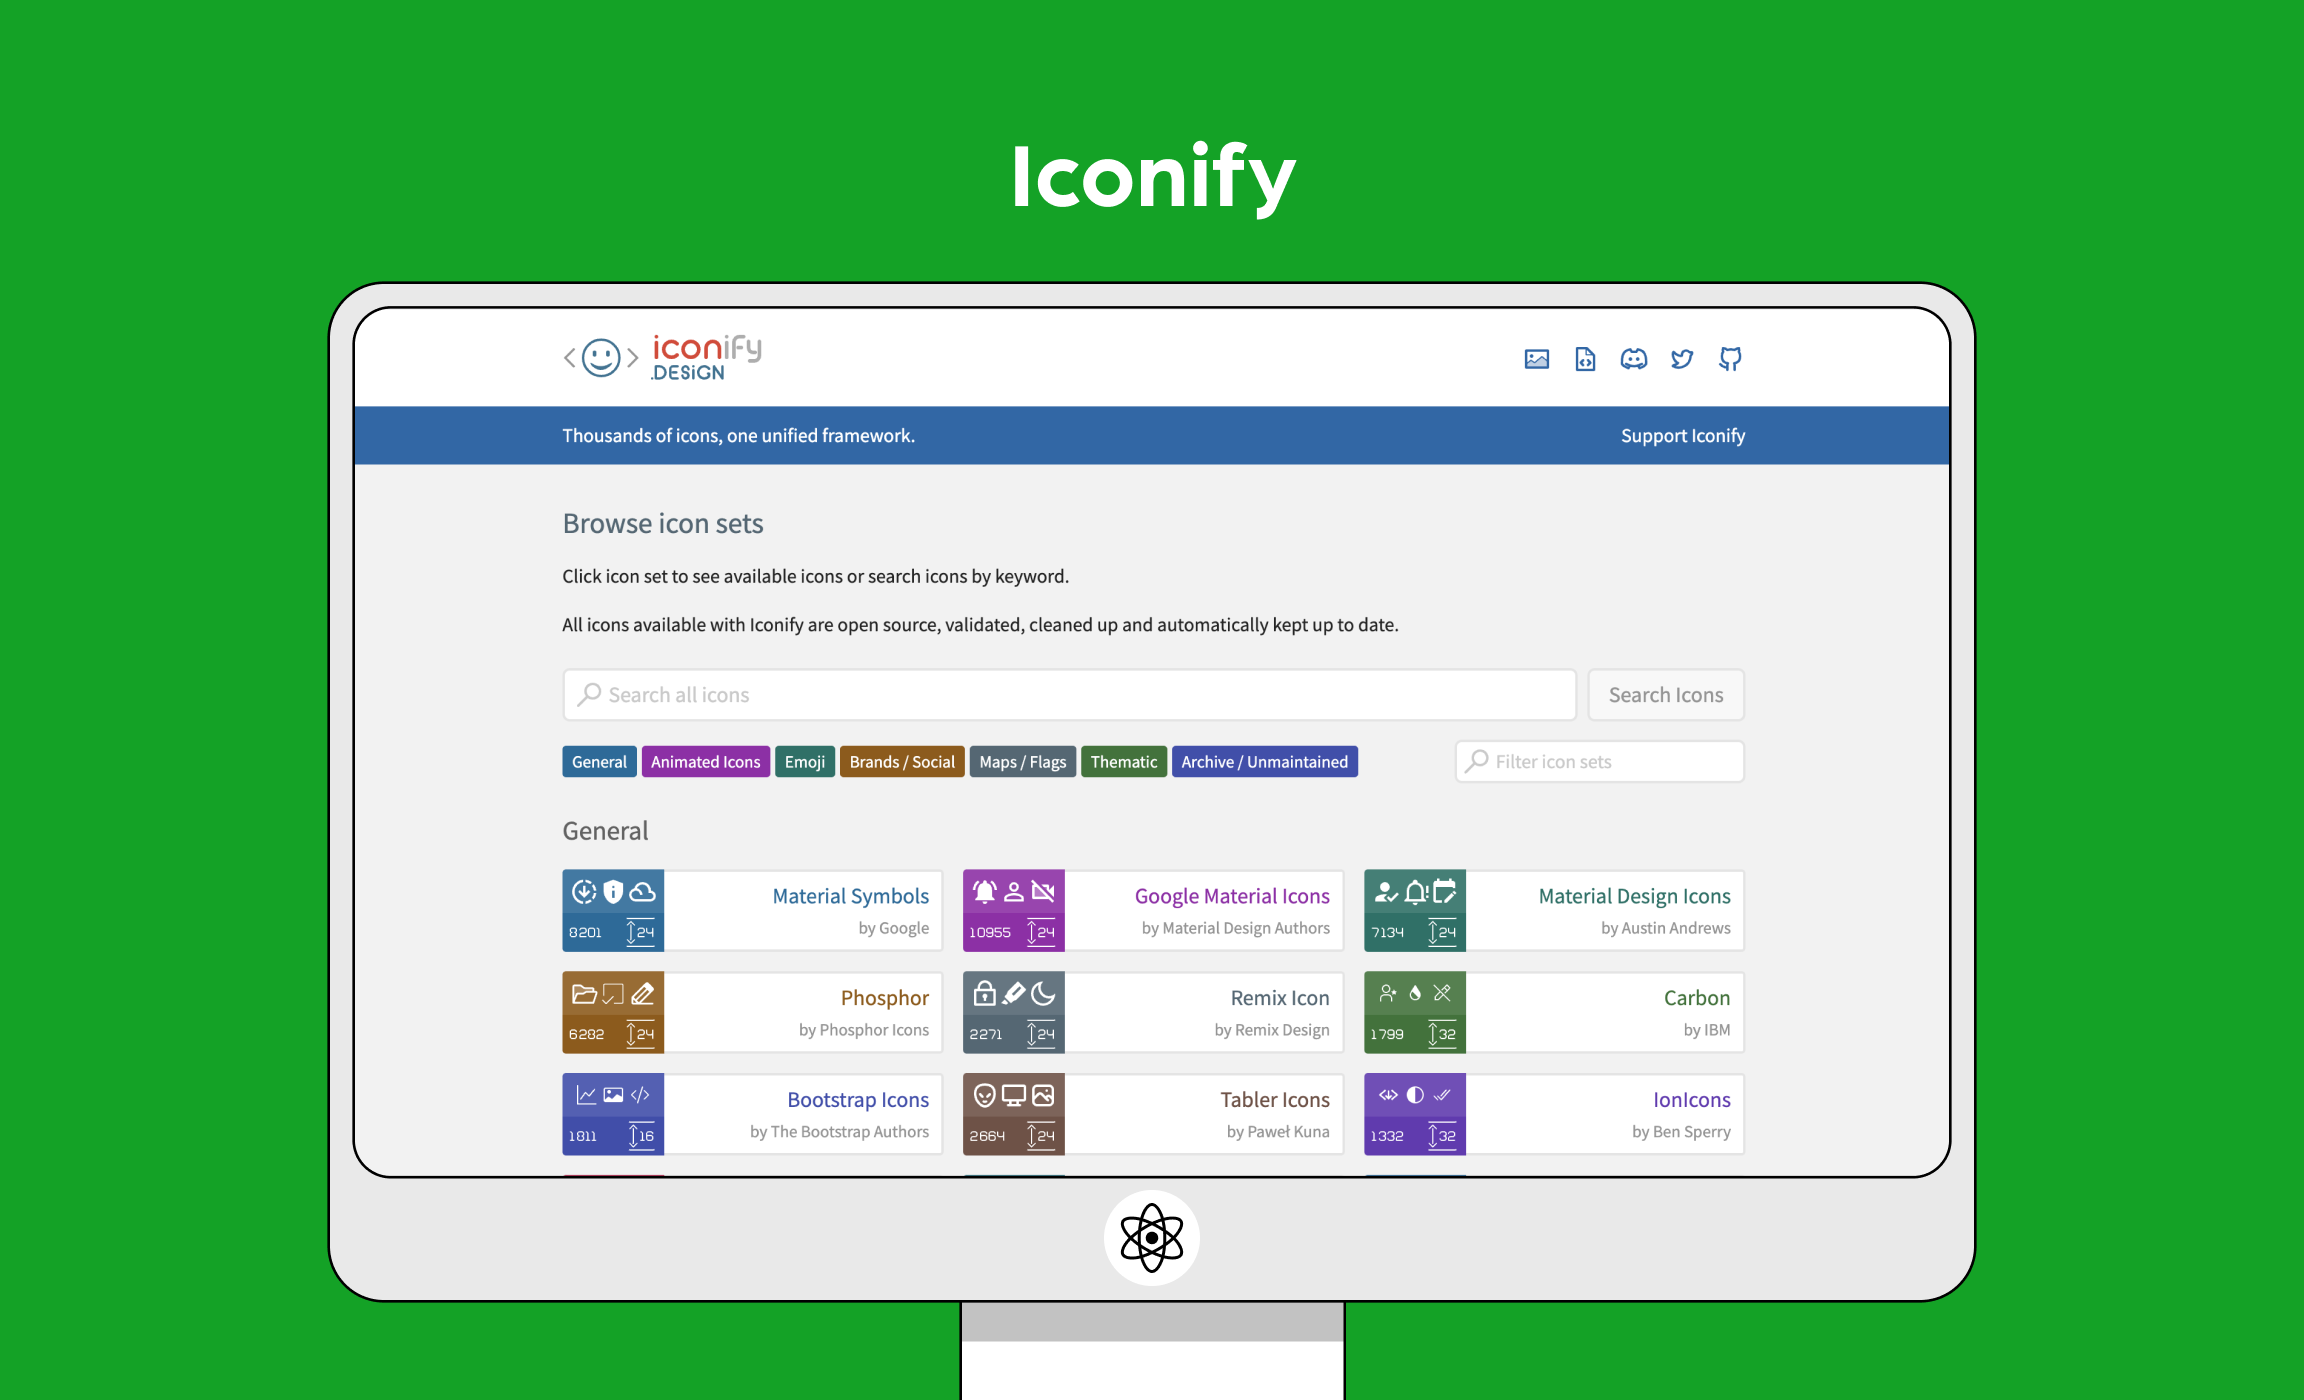 unable to search/filter icons · Issue #20 · iconify/iconify-sketch · GitHub